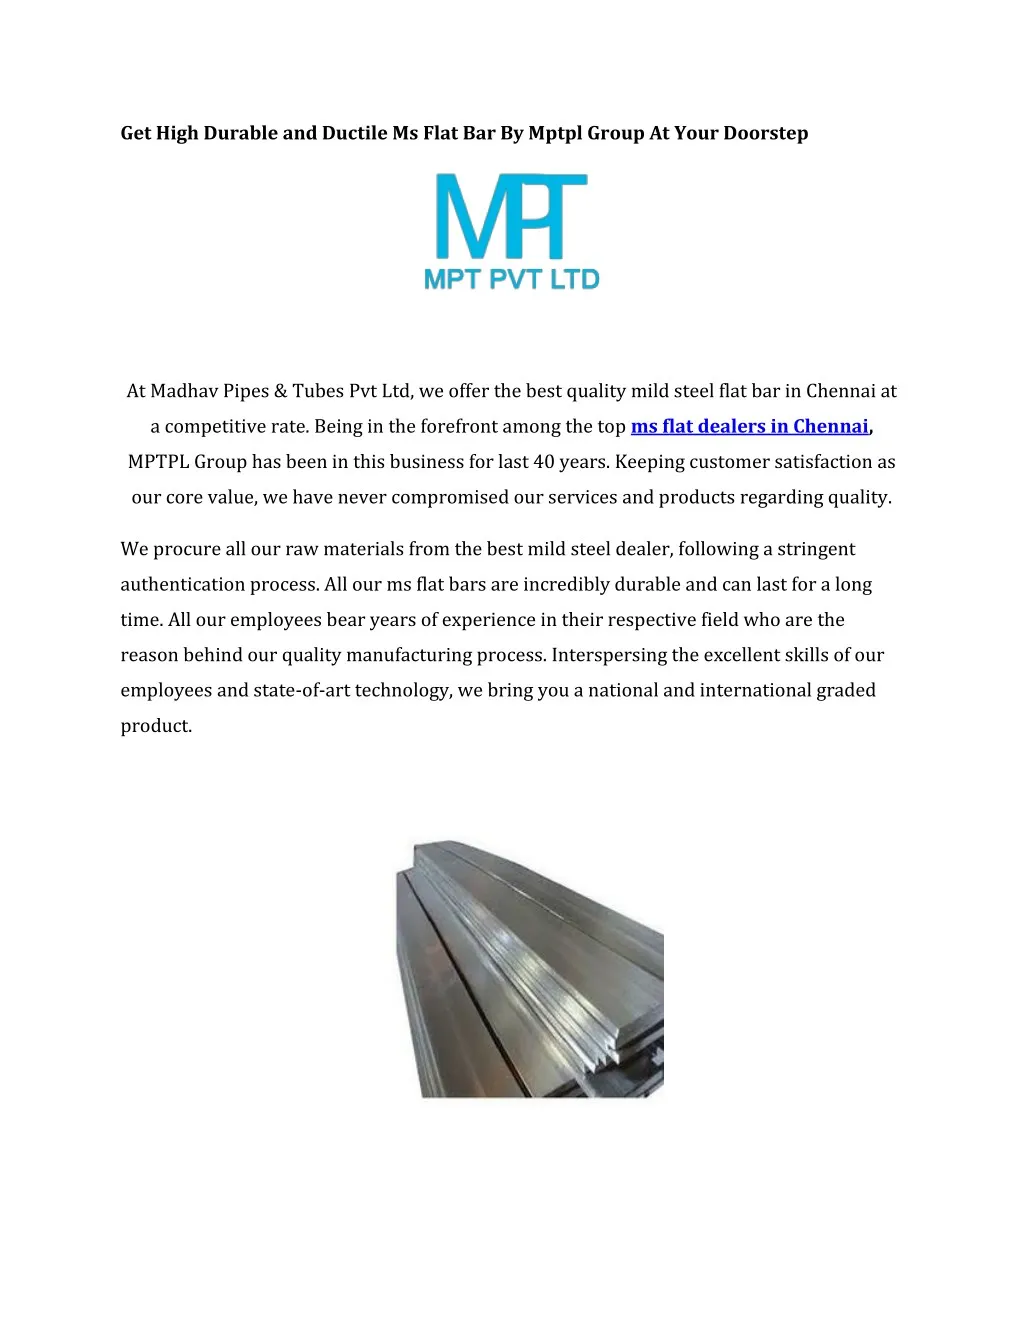 get high durable and ductile ms flat bar by mptpl